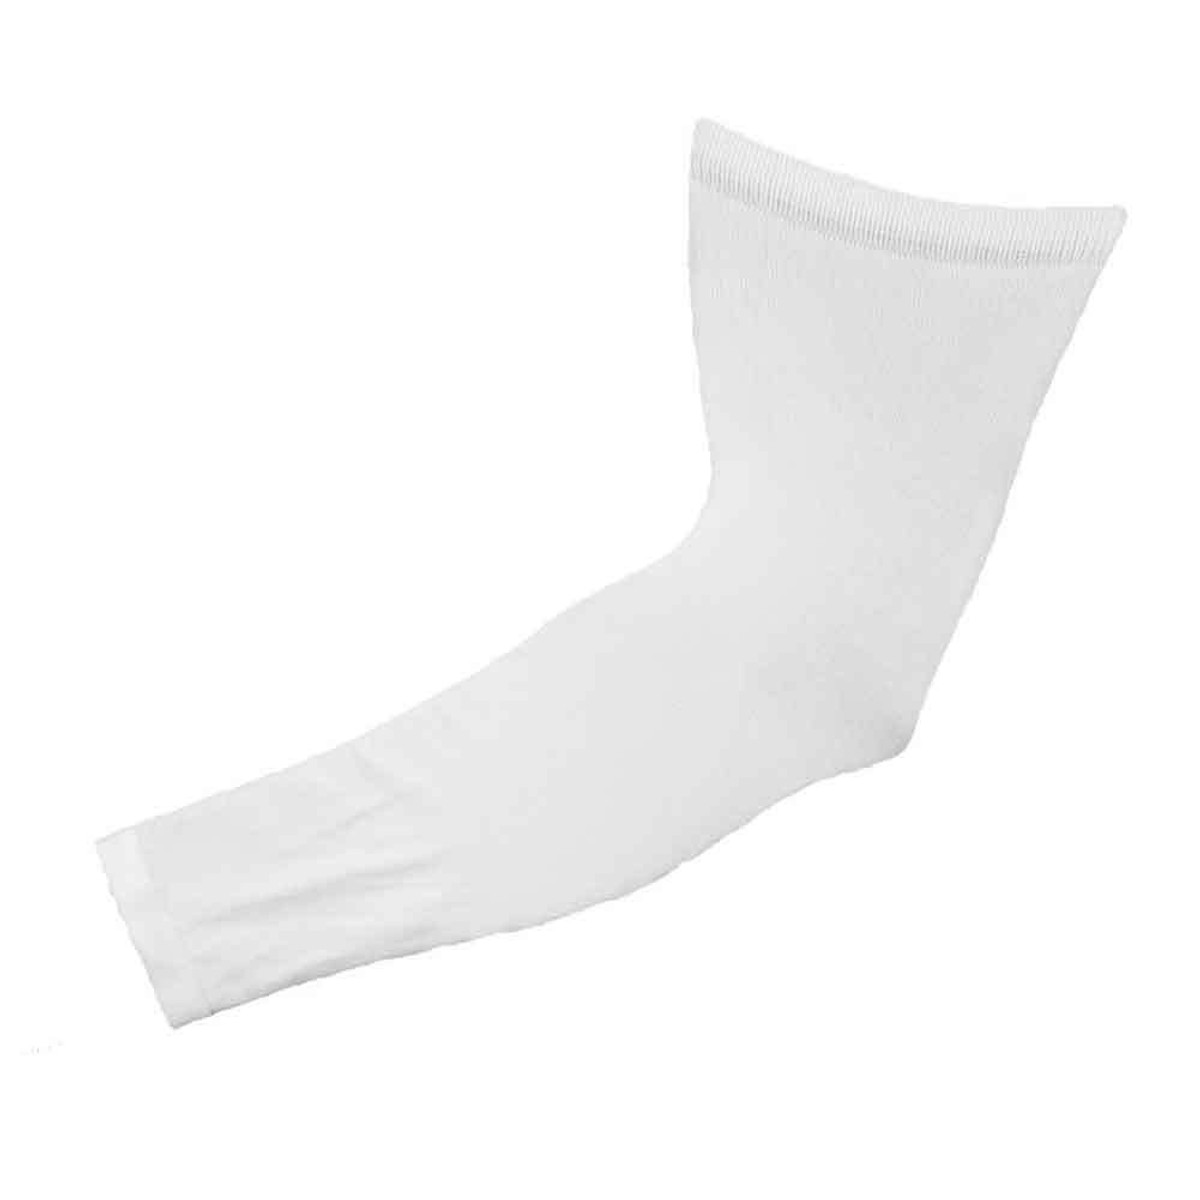 Glide Compression Arm Sleeves - White - Small/Medium